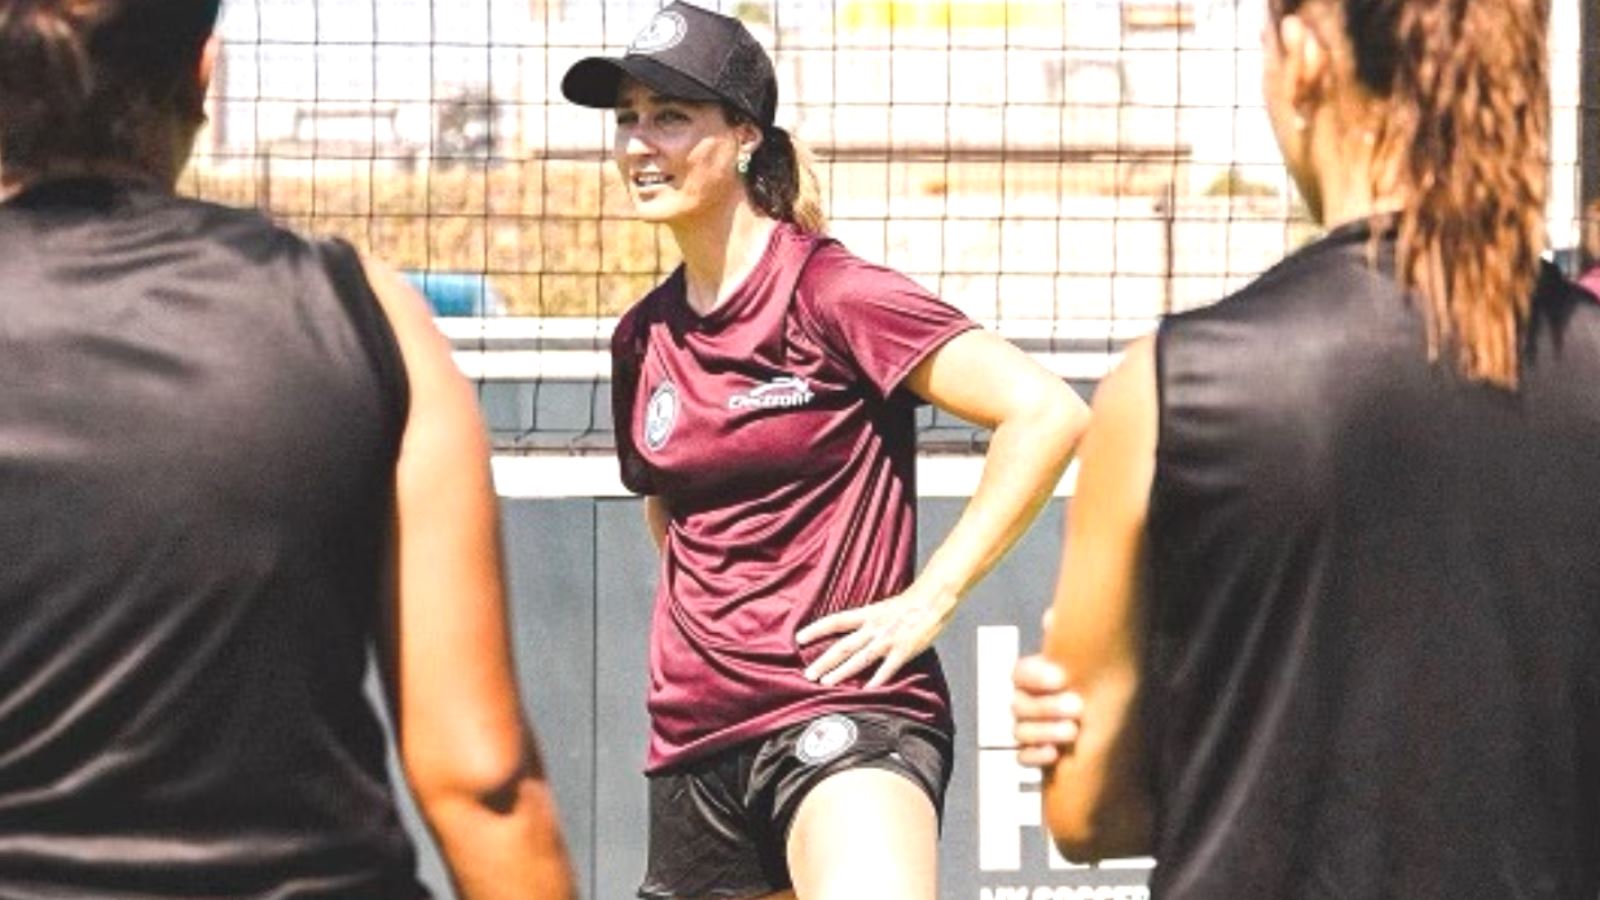 Dr. Nicole Surdyka wearing a tshirt, shorts, and black cap, stands on a soccer field coaching female soccer players.